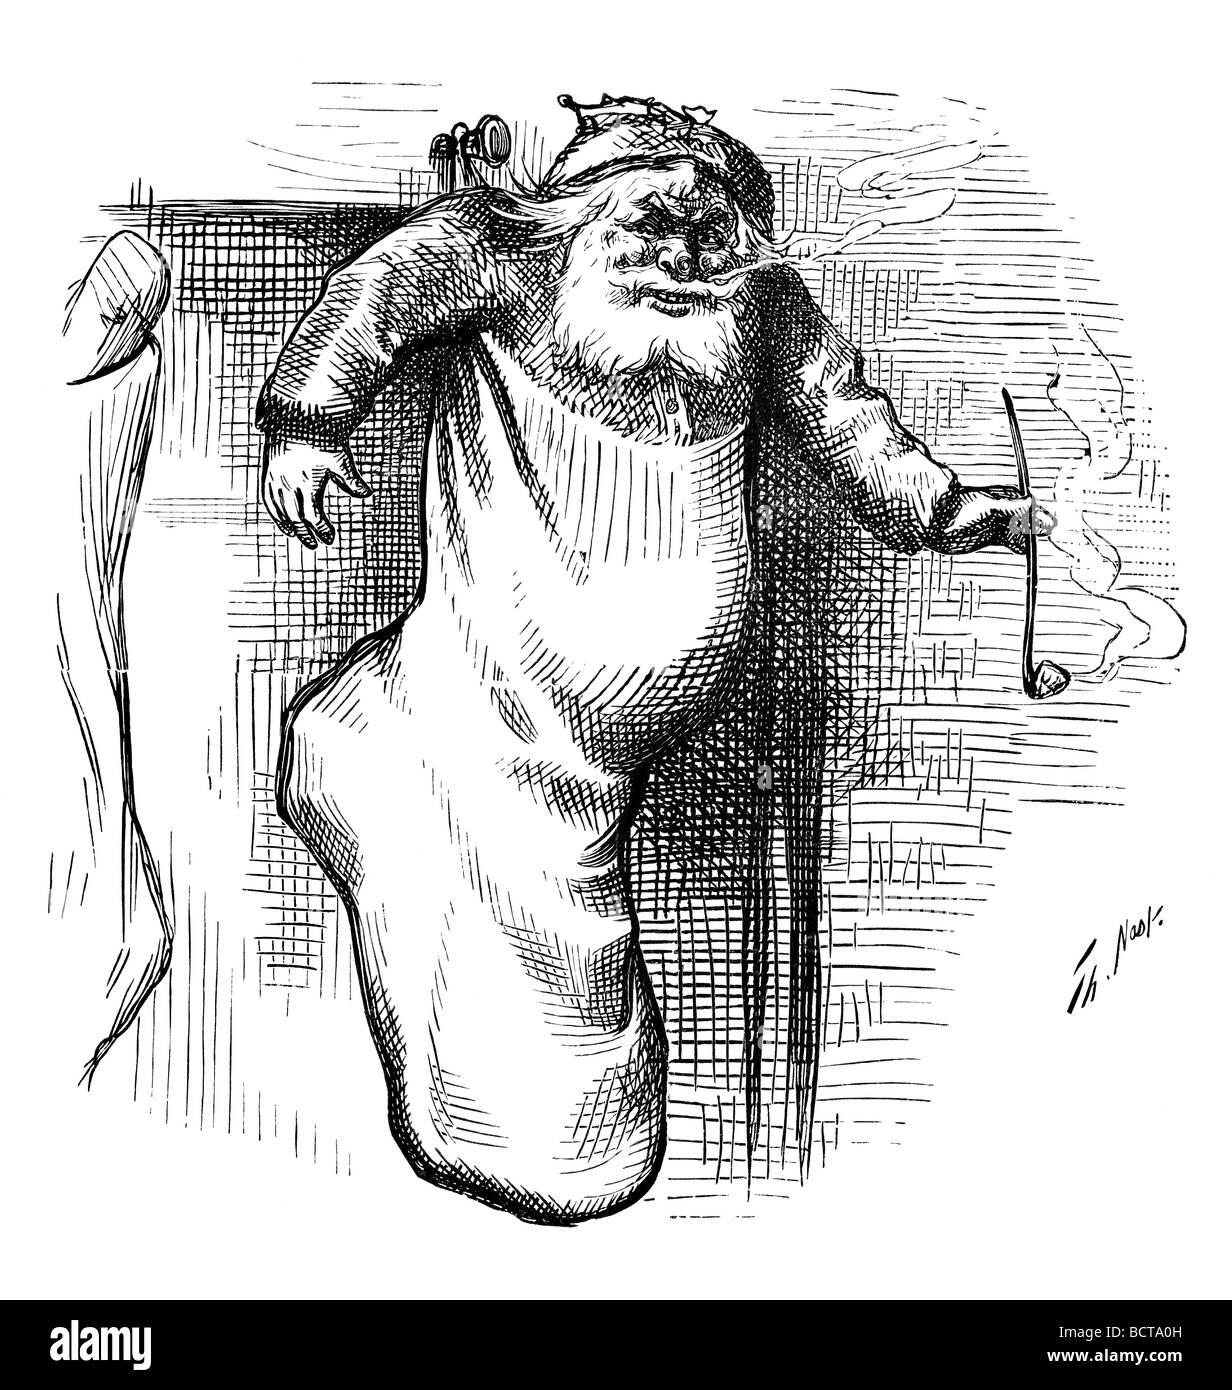 Santa Claus in a Christmas stocking. Classic 19c wood cut of Santa Claus by Thomas Nast. Stock Photo